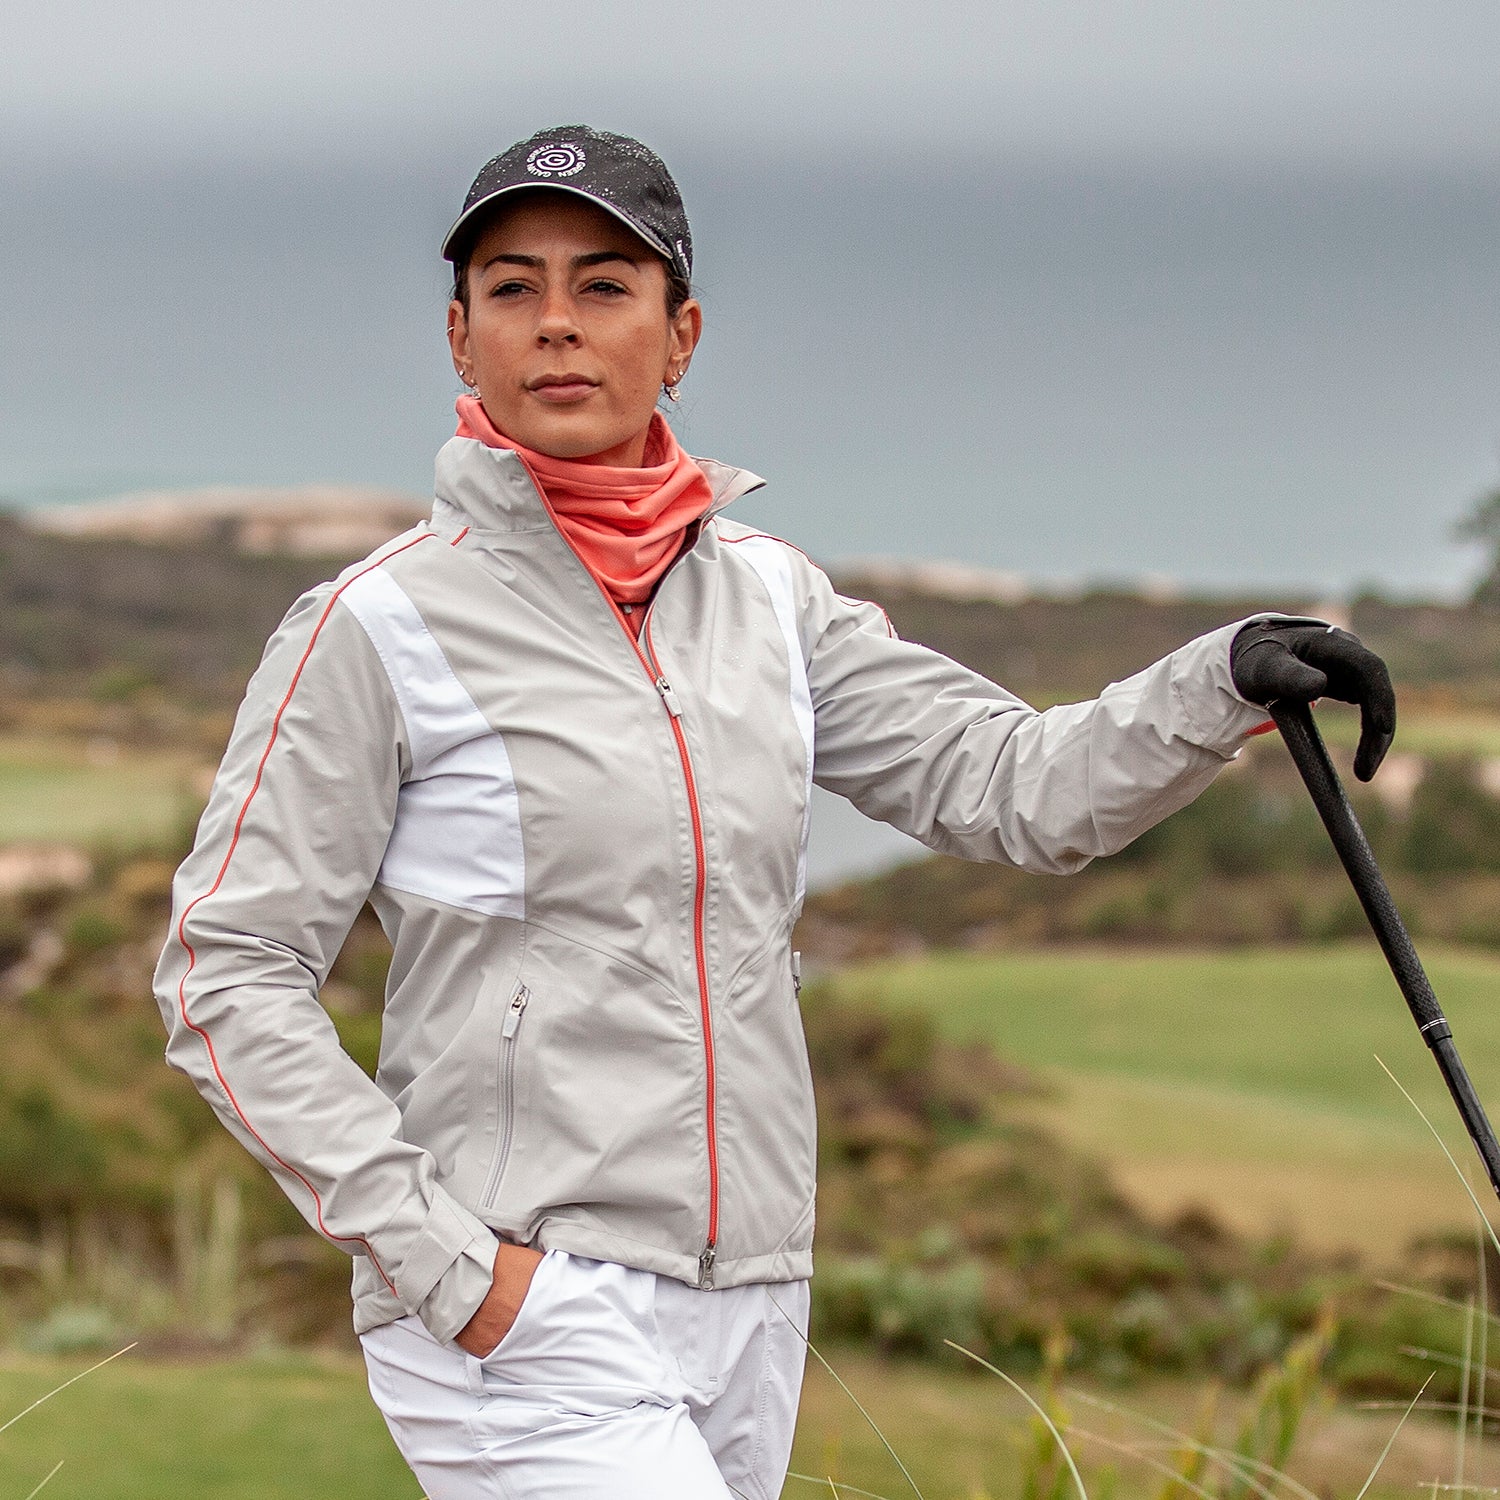 Galvin Green Ladies GORE-TEX Paclite Jacket with Contrast Panels in Cool Grey/White/Coral